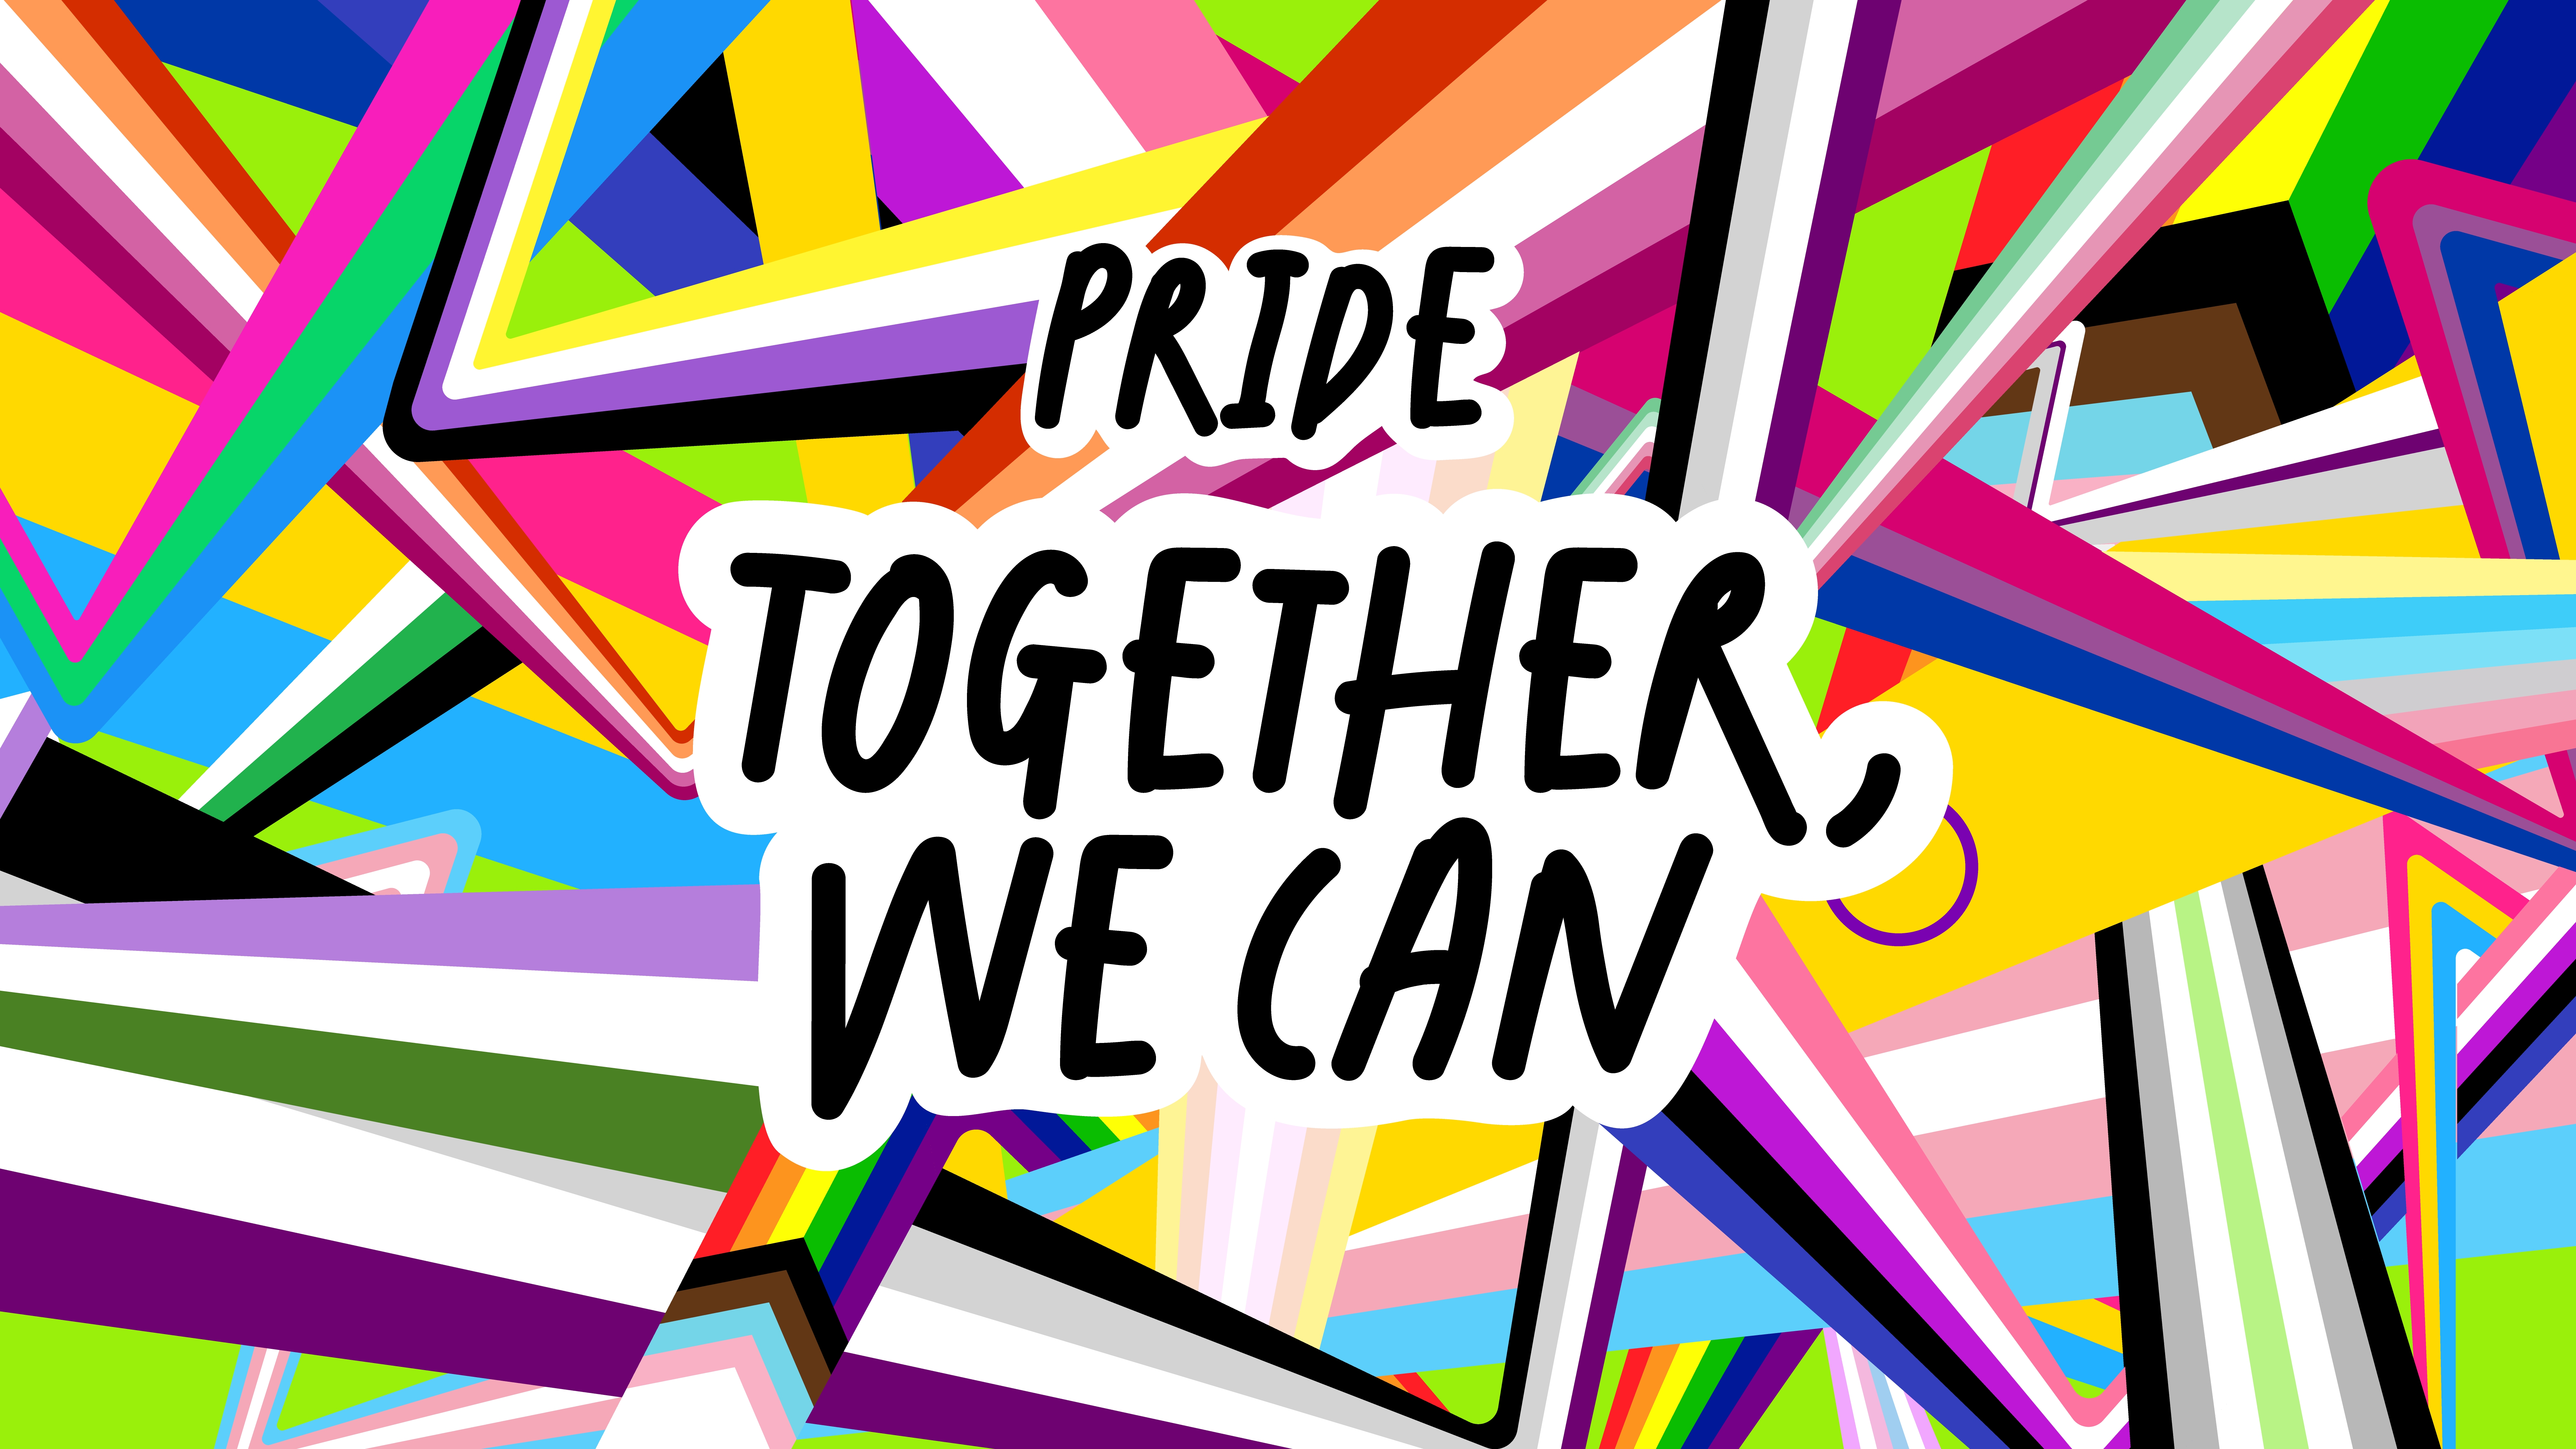 HD wallpaper, 8K, Microsoft Pride, Together We Can, Lgbtq, Colorful Background, 5K